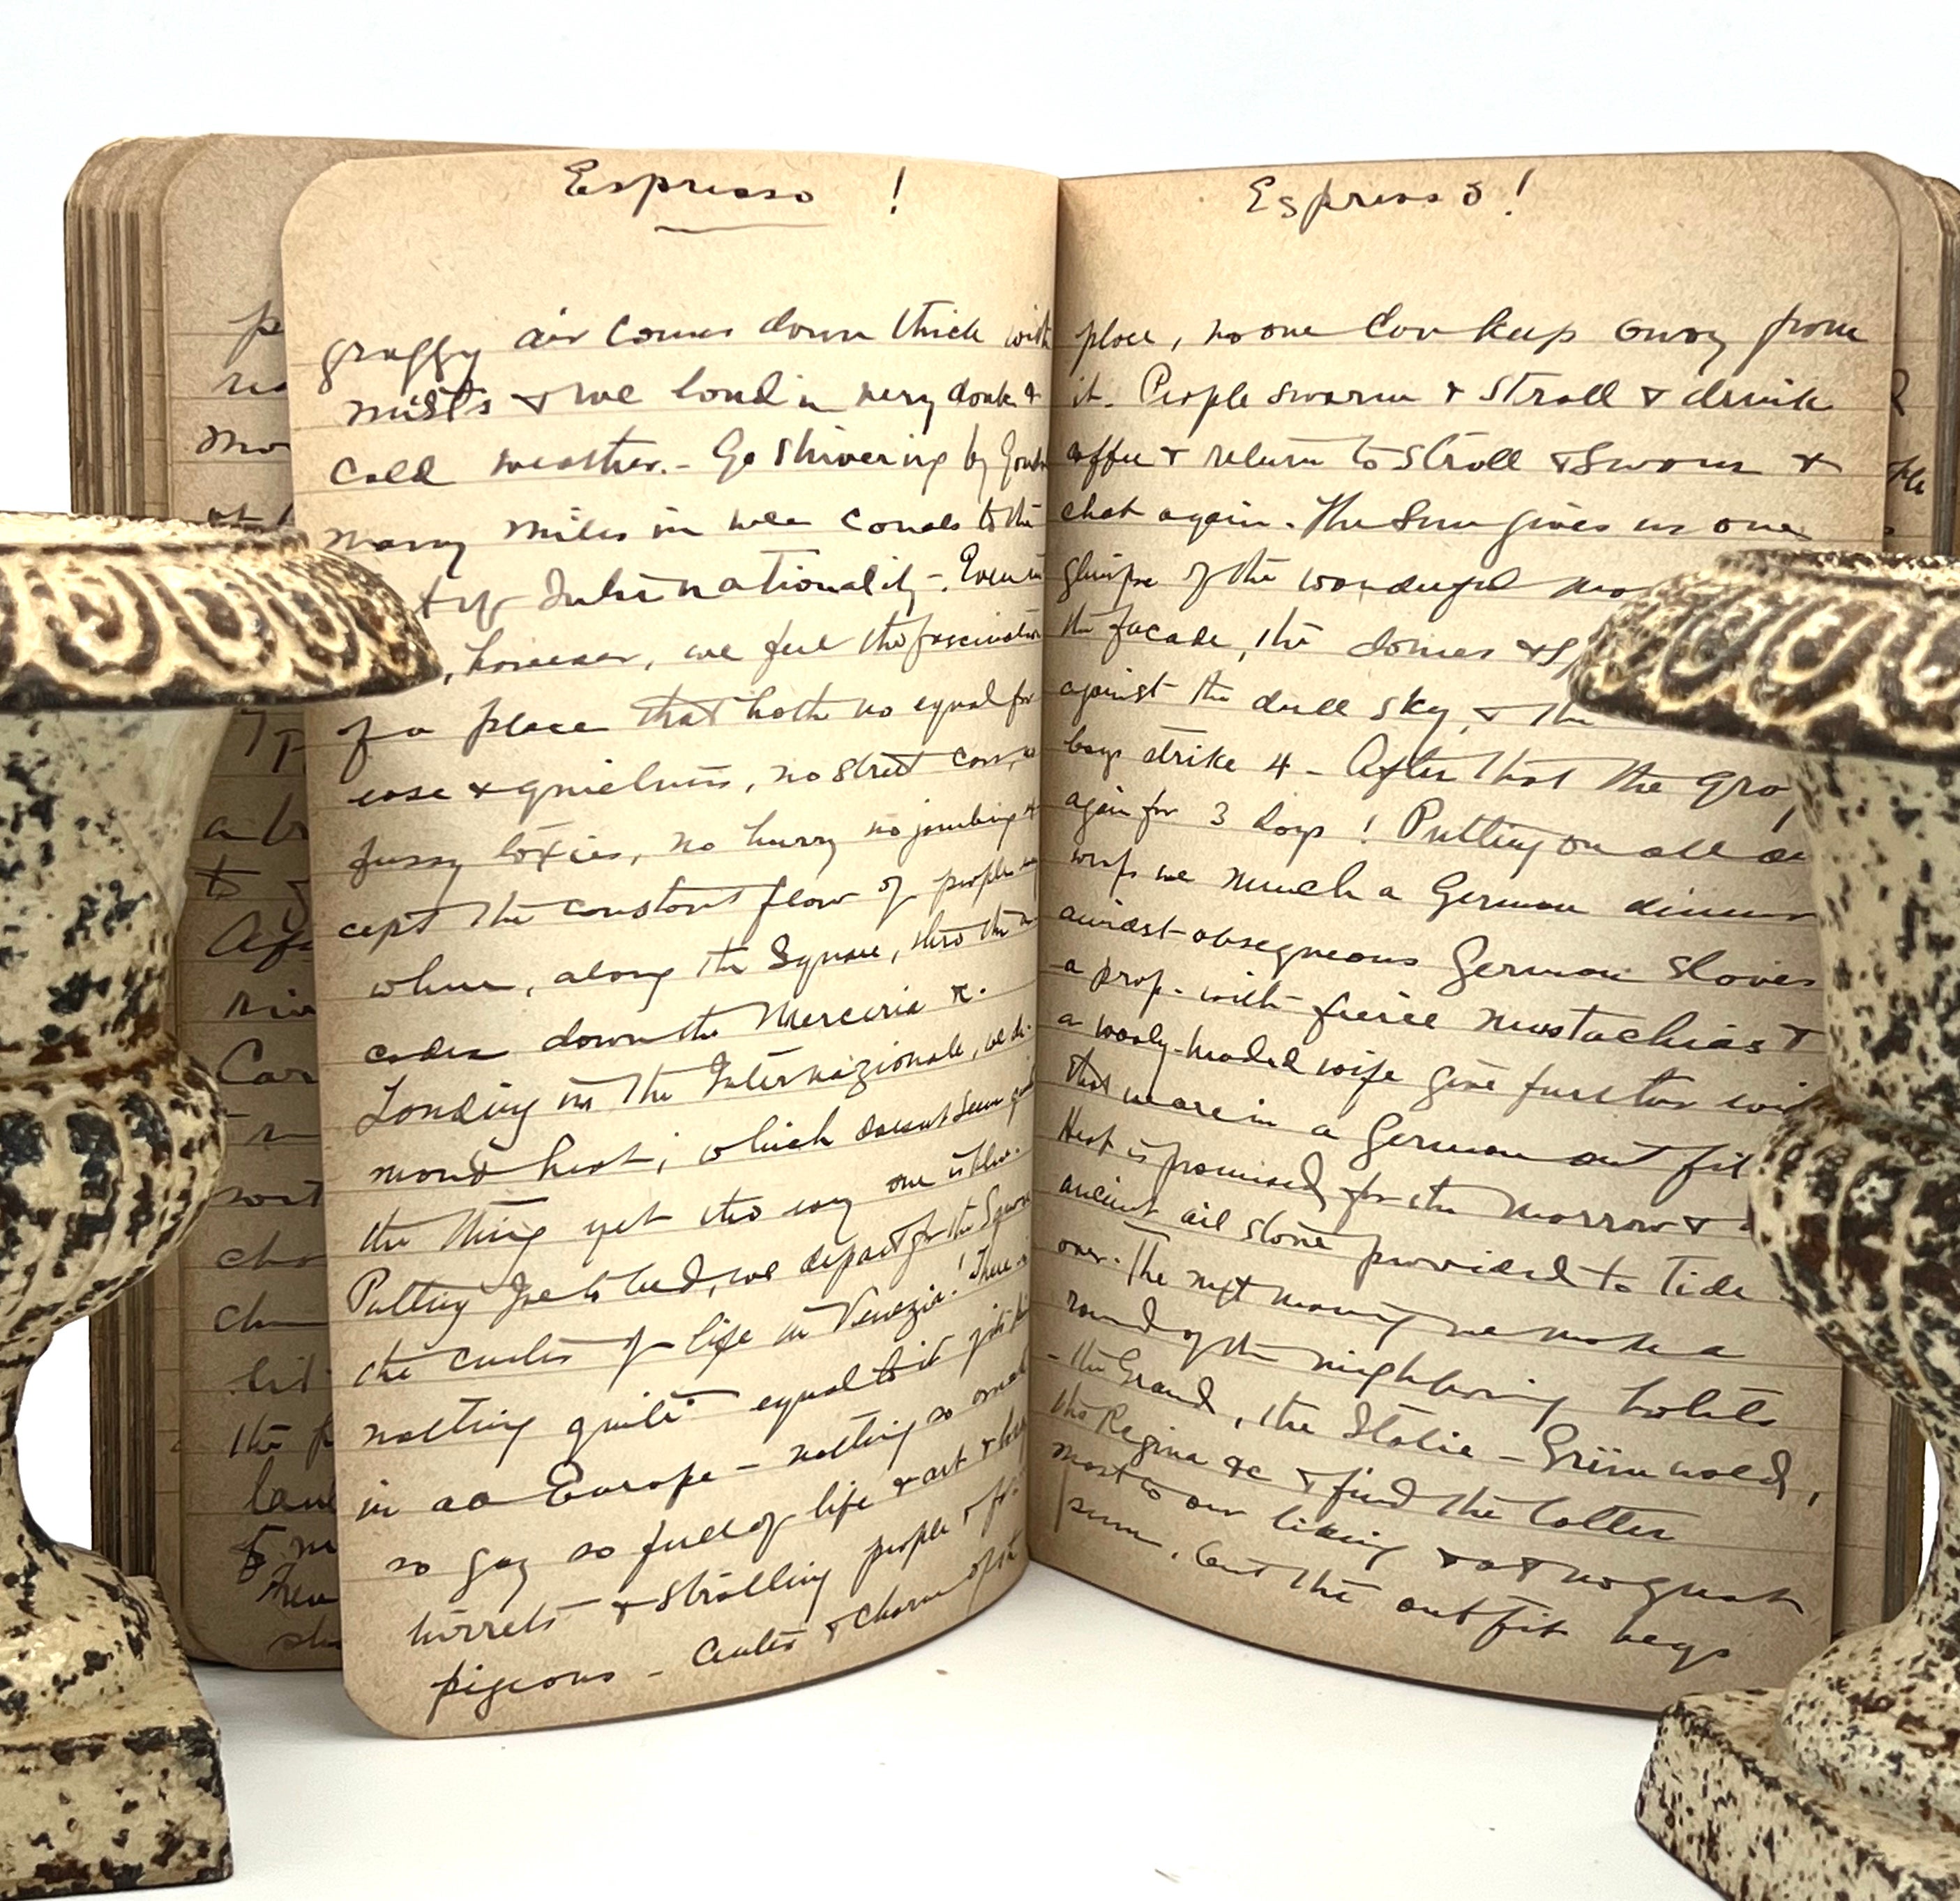 Journal of the Great Voyage